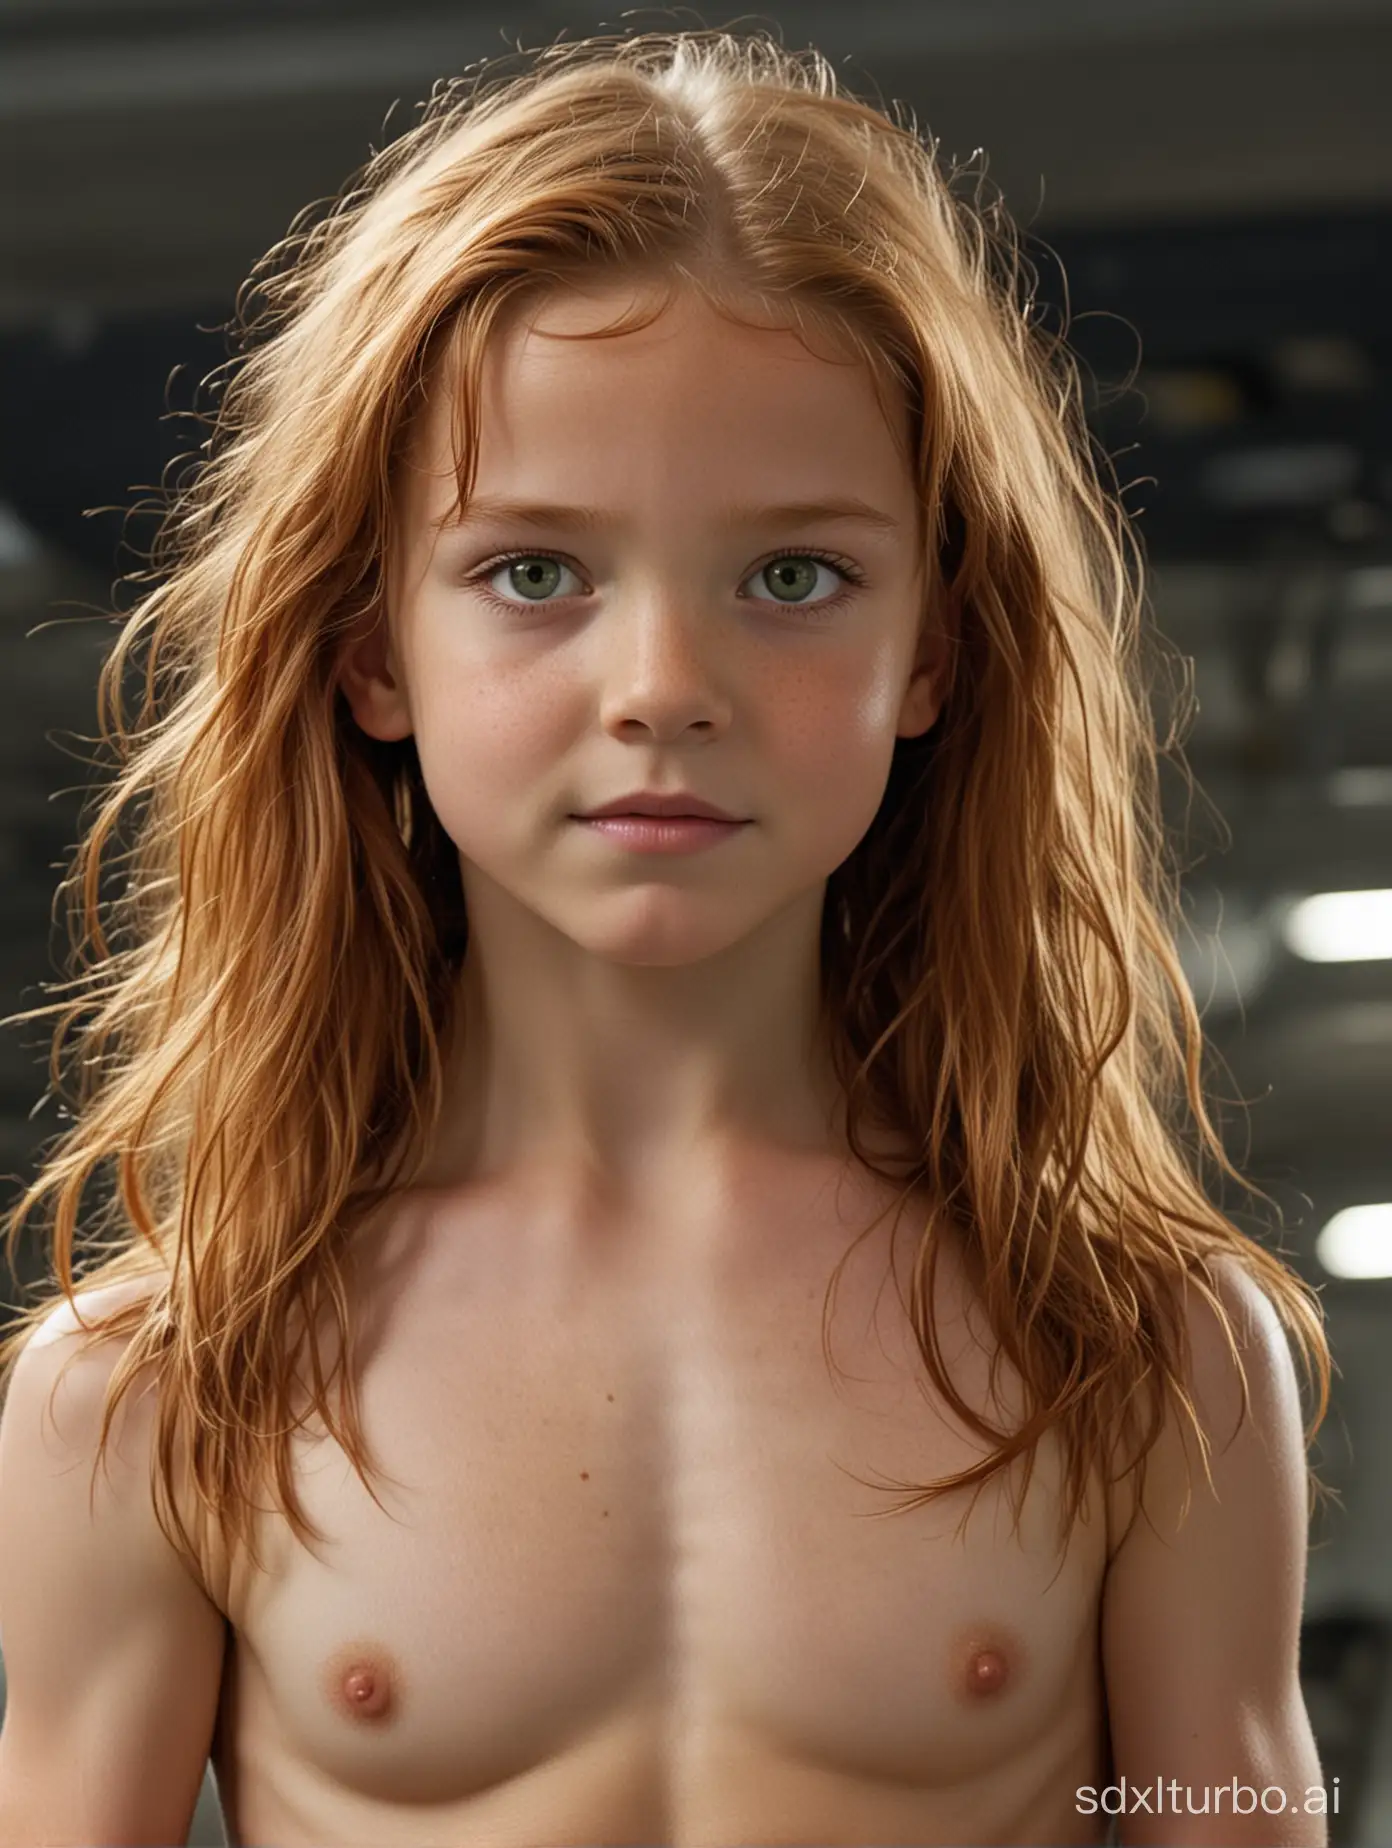 8years old girl, flat chested, very muscular abs, showing her belly, long ginger hair, green eyes, in Aliens movie